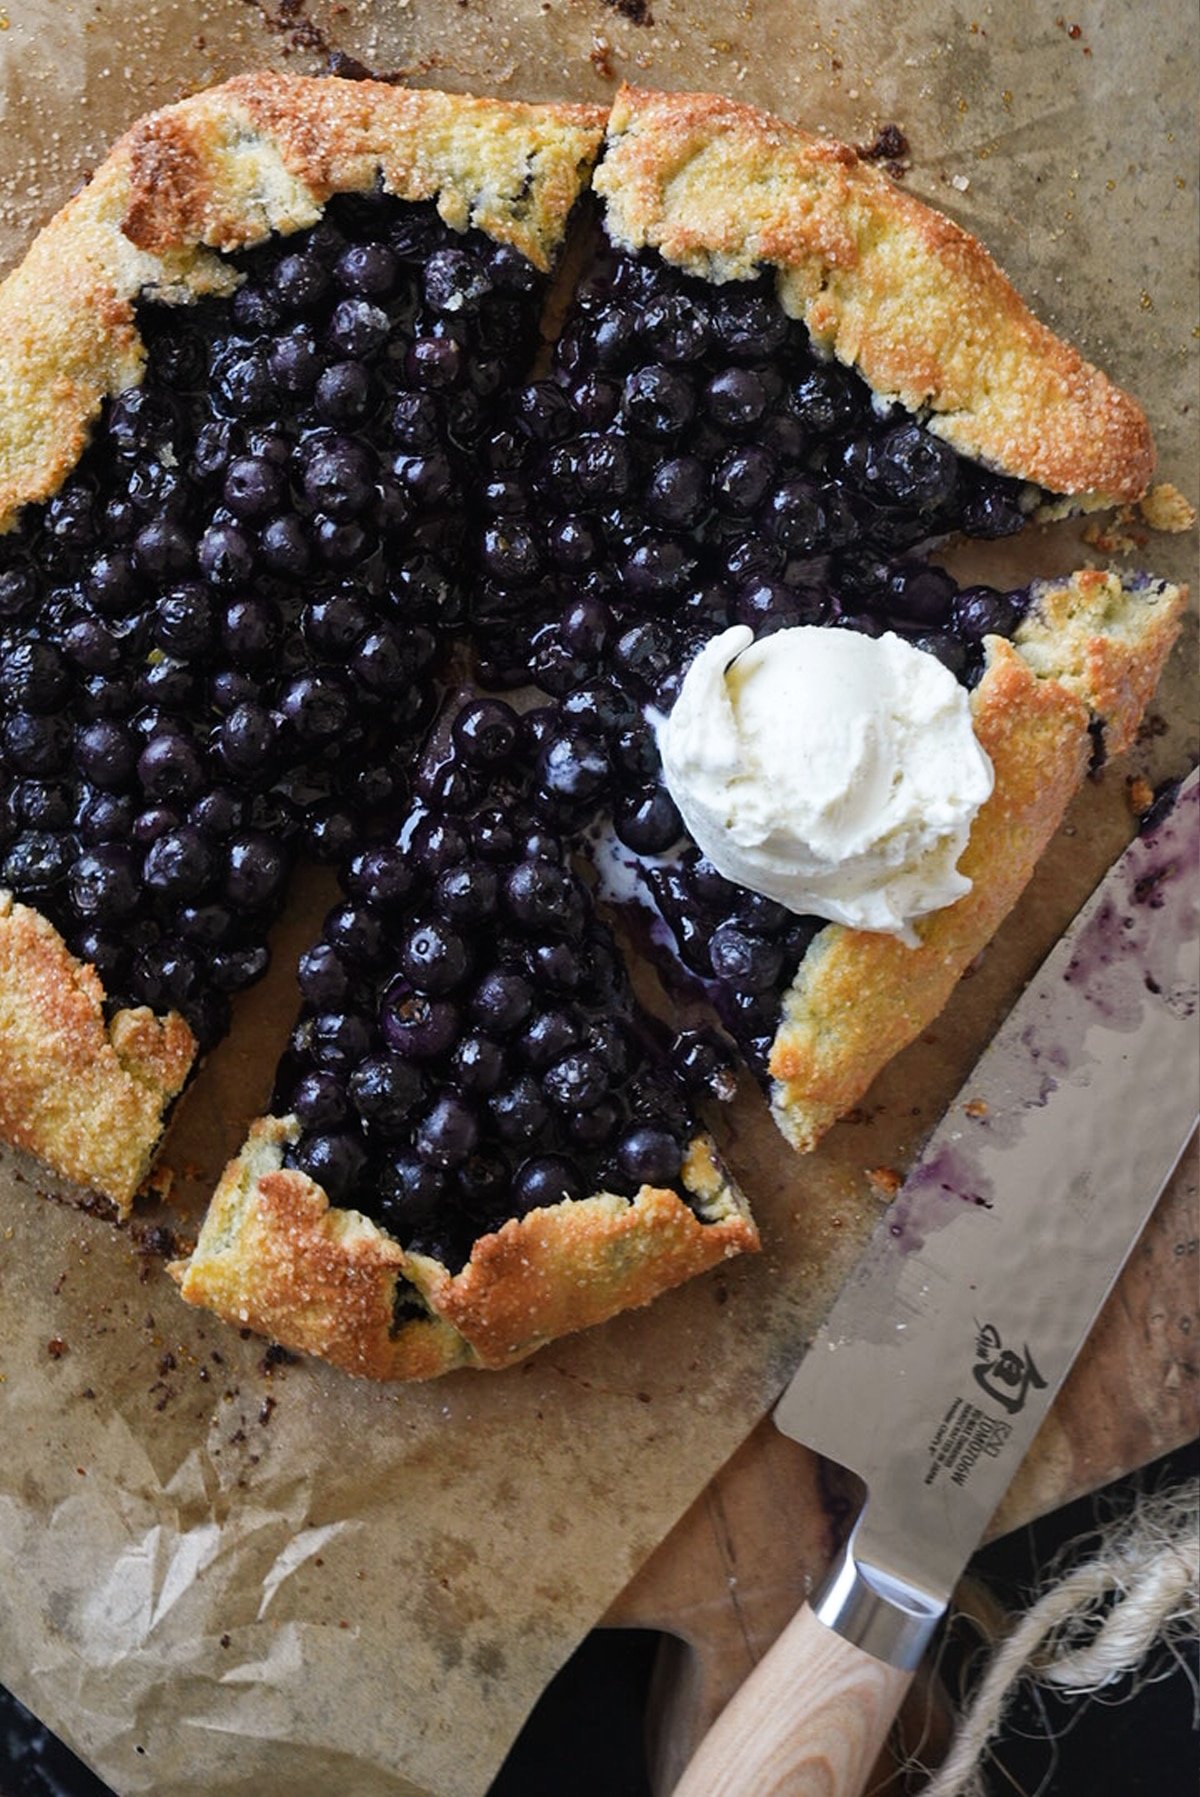 A keto blueberry galette with an almond flour pie crust